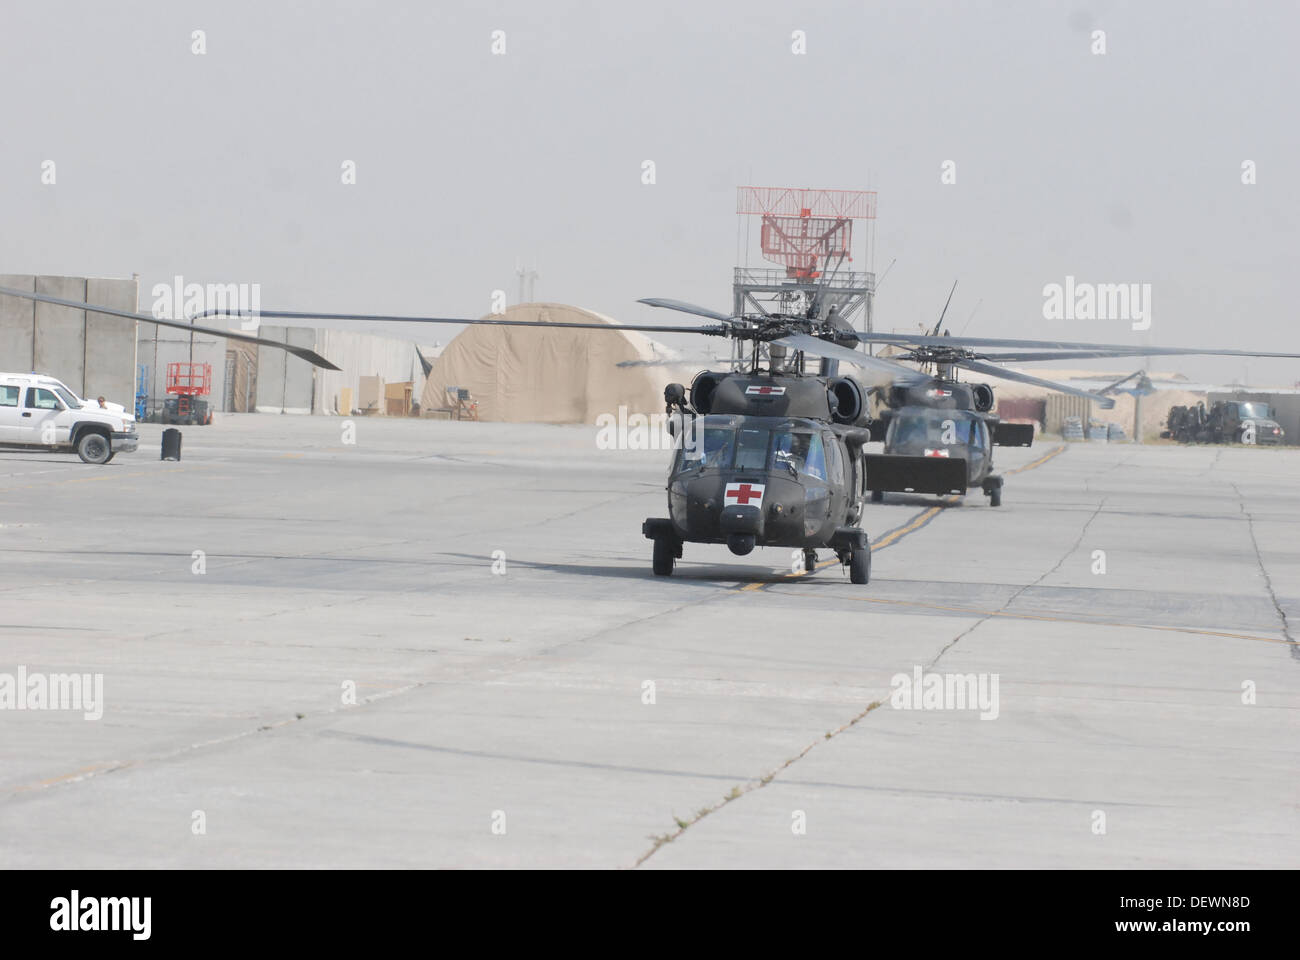 A pair of HH-60M Black Hawk medical evacuation helicopters crewed by members of C Company (DUSTOFF), 3rd Battalion (General Support), 10th Combat Aviation Brigade, Task Force Phoenix, taxi to the patient drop-off location outside Heathe N. Craig Joint The Stock Photo